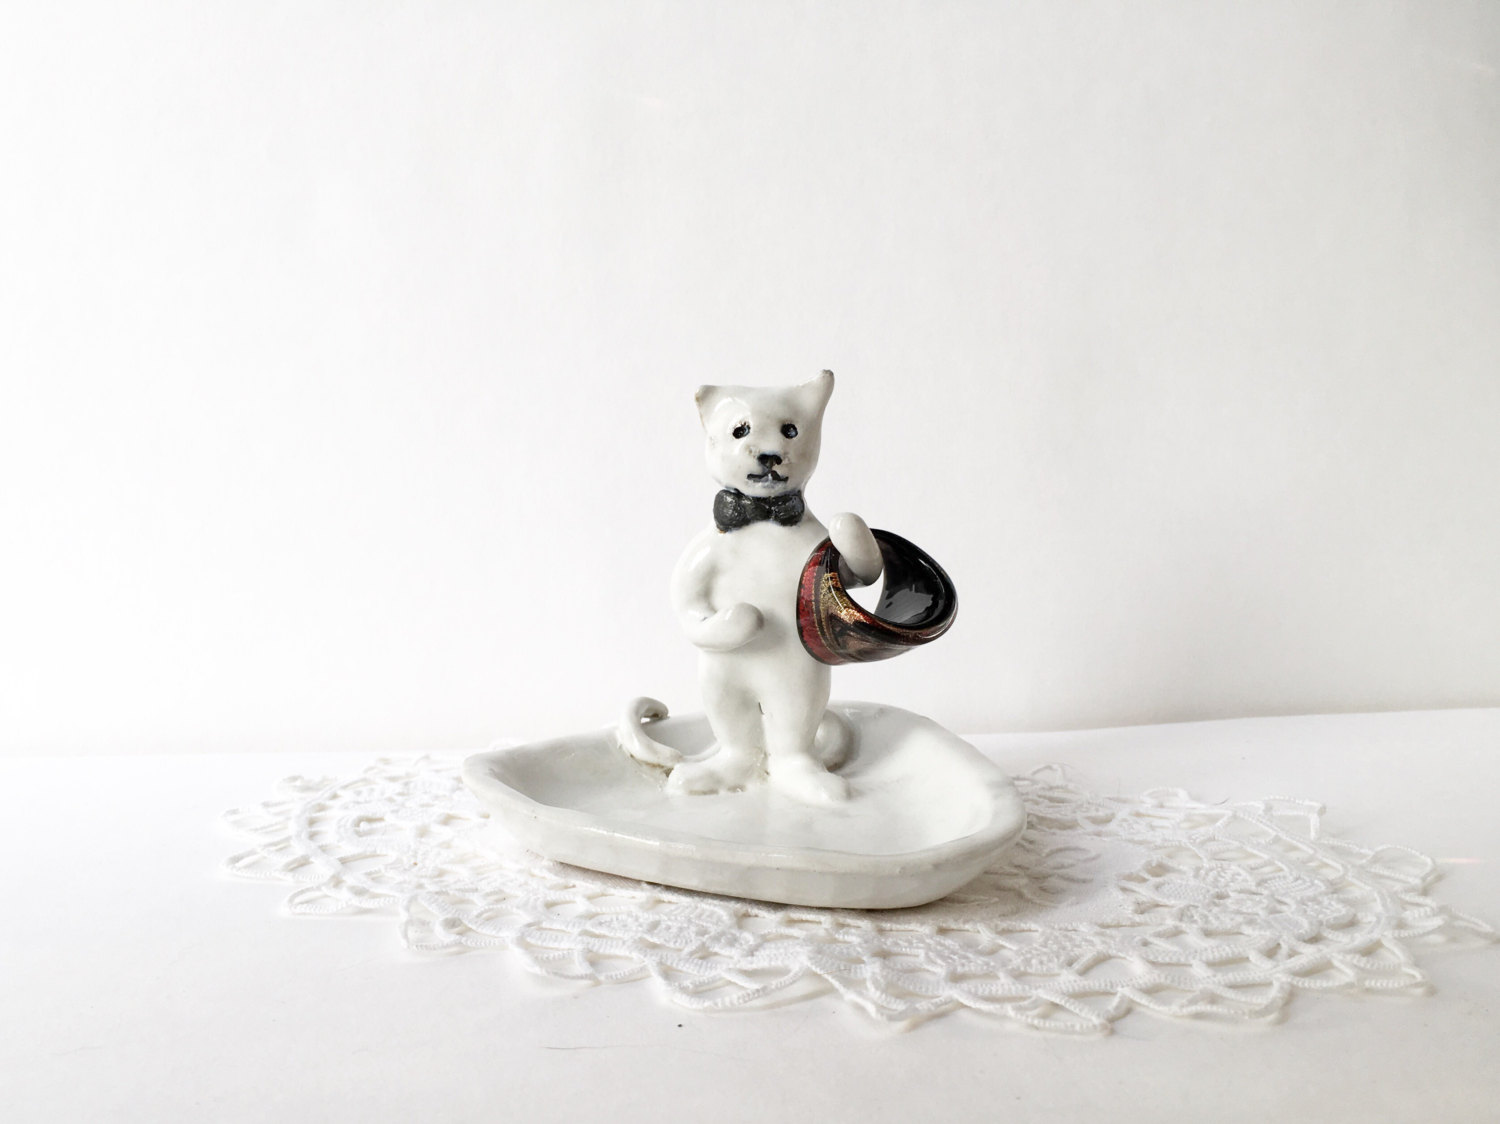 Cat Ring Dish - Ceramic Ring Holder - Cat Lover Gift - Crazy Cat Woman - Kitty Jewellery Holder - interior Deco - any age gift - unisex